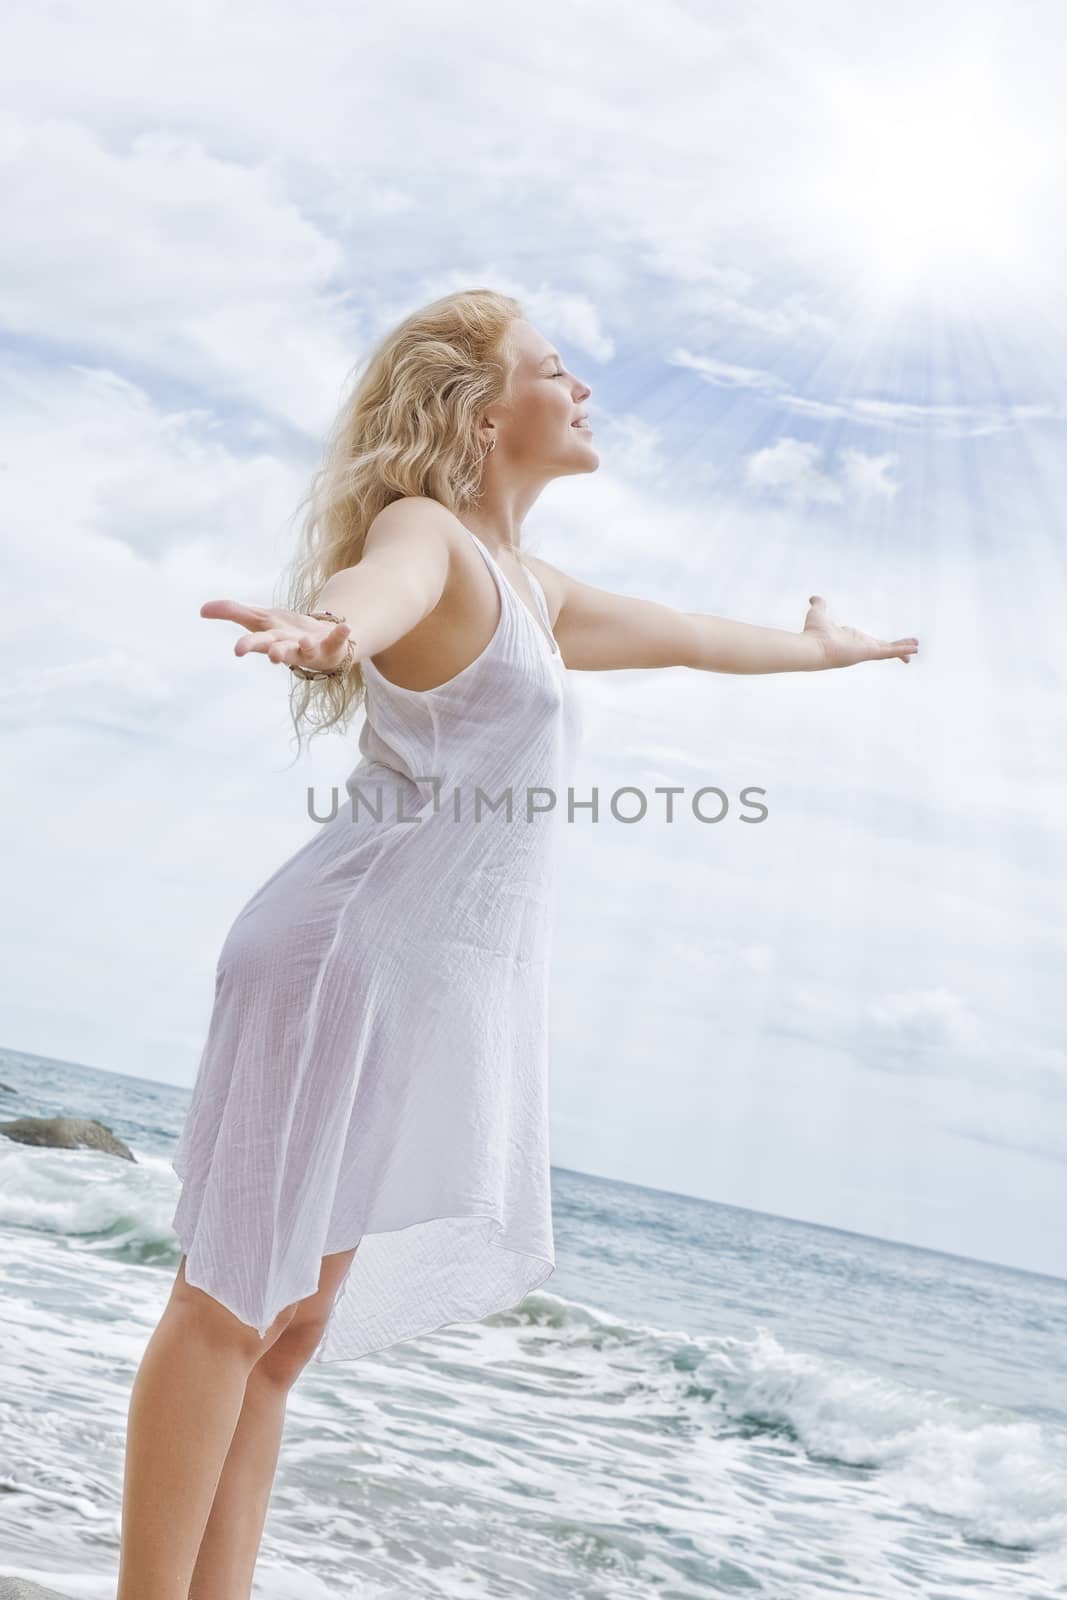 Portrait of nice young woman  having good time on tropical beach